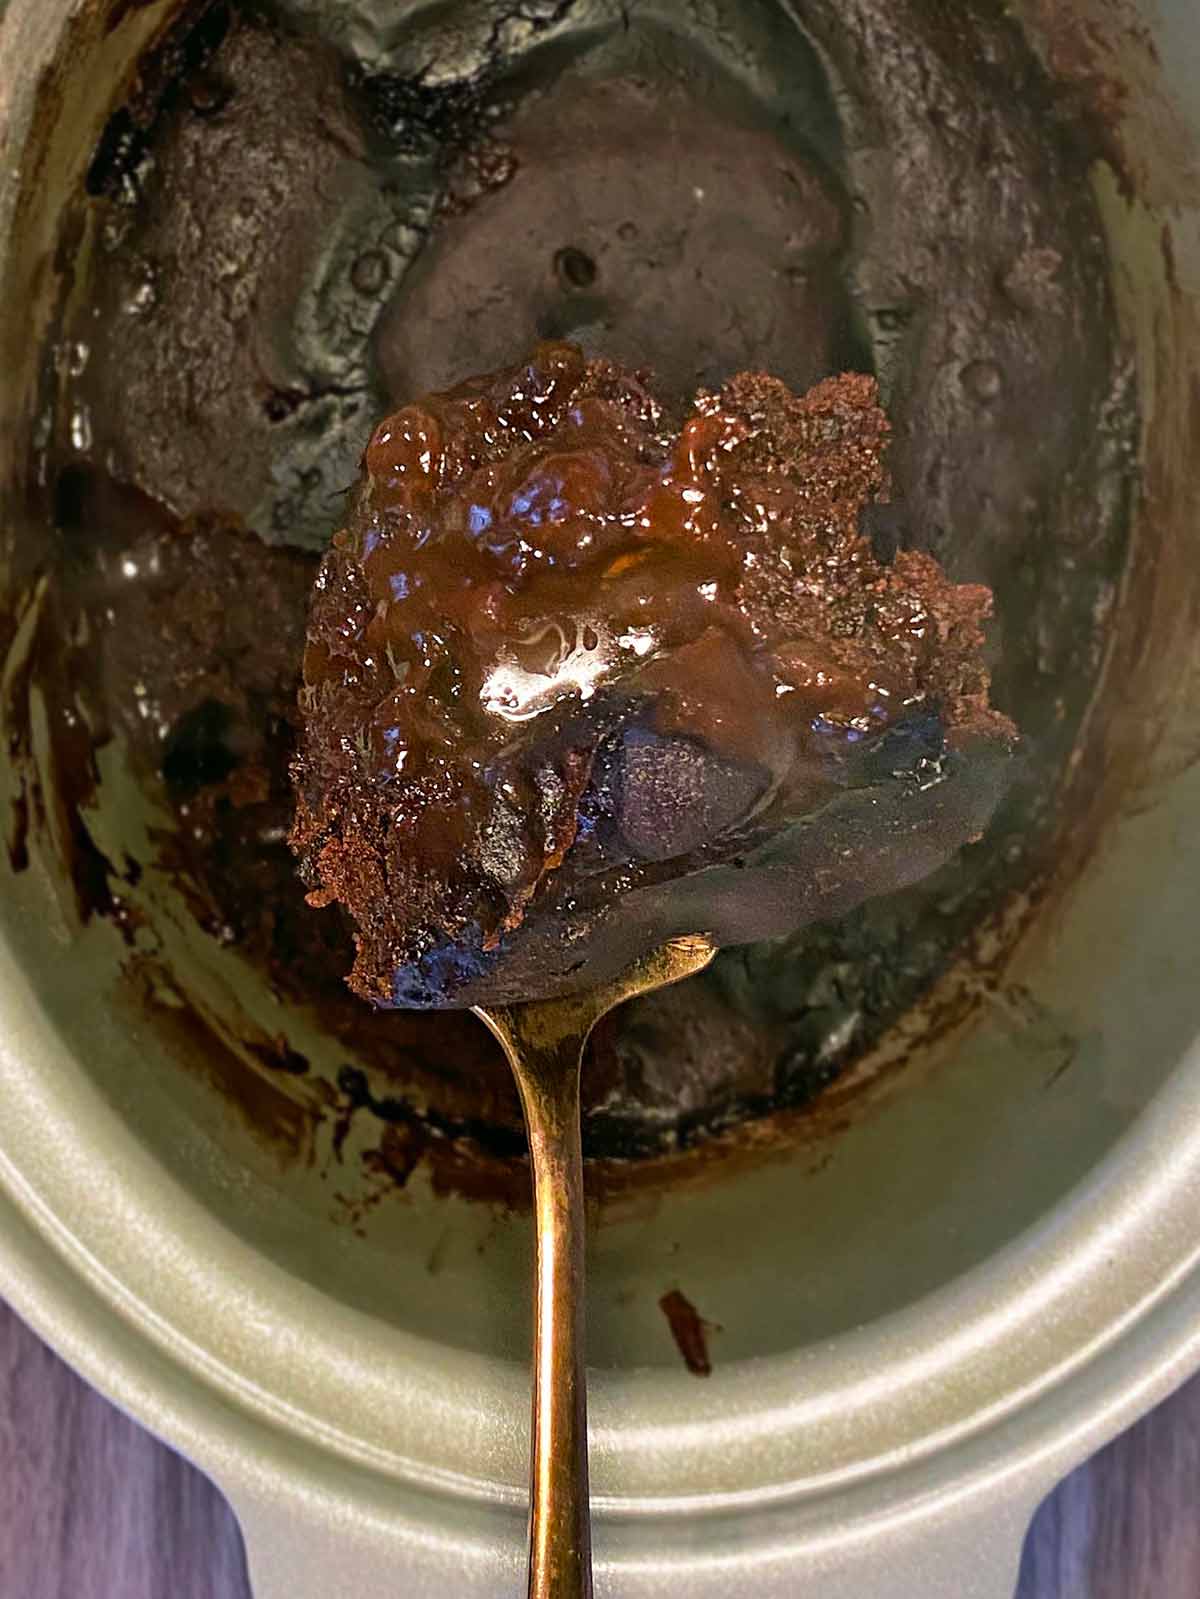 A spoon lifting out some cake from the slow cooker.